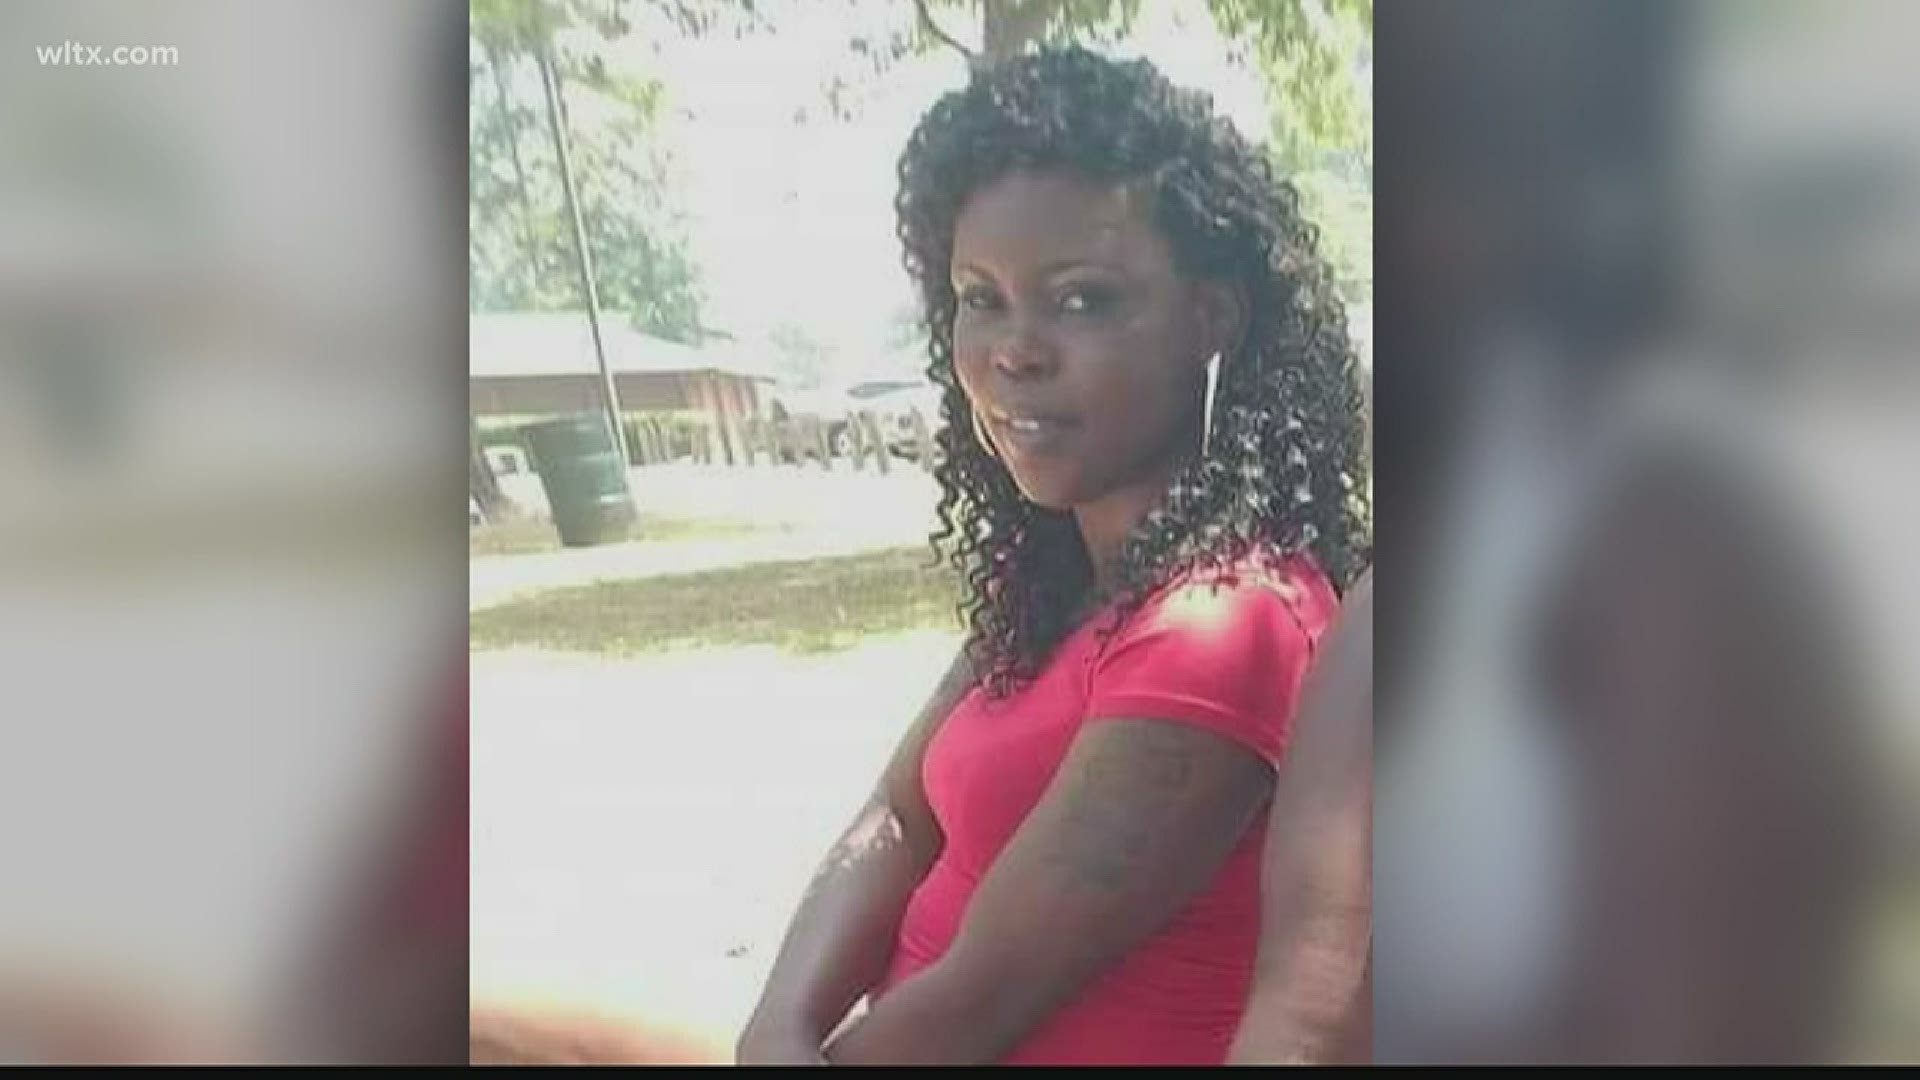 Regina Singleton: "She was beautiful in and out. I promise you God got an angel, he got an angel Sunday."